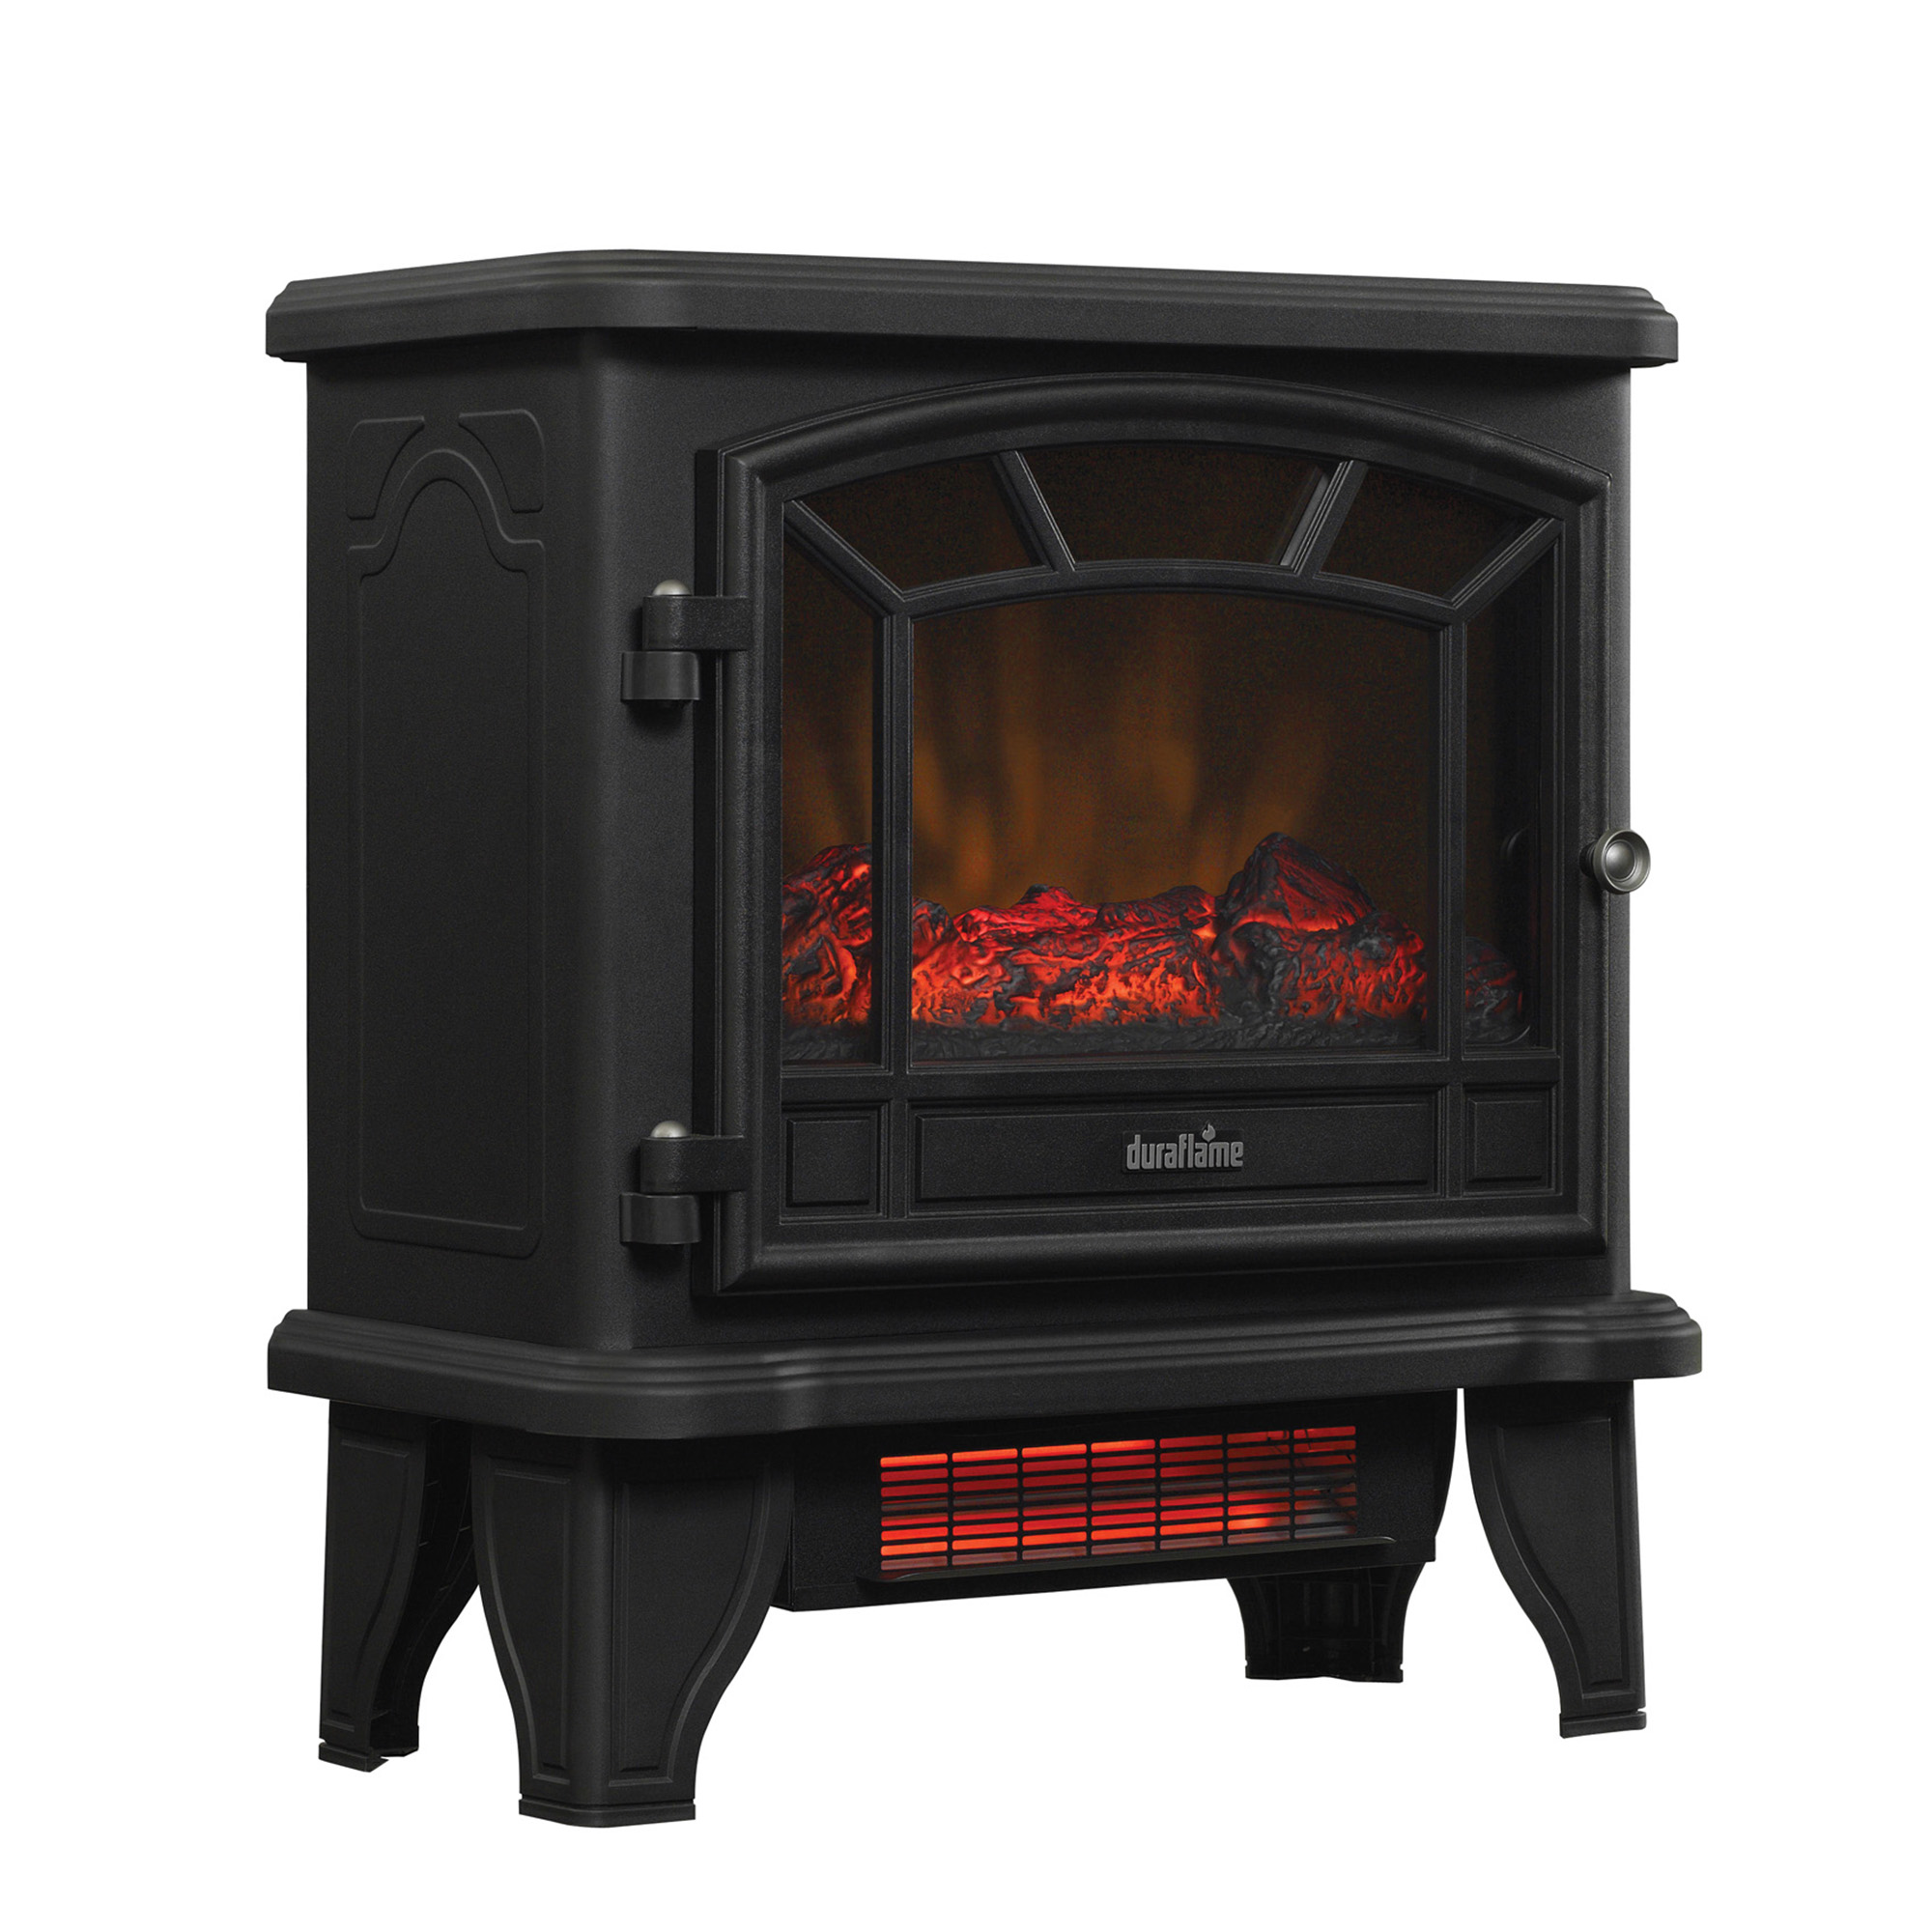 Duraflame 1,000 sq ft Infrared Quartz Electric Fireplace Stove Heater - image 1 of 5